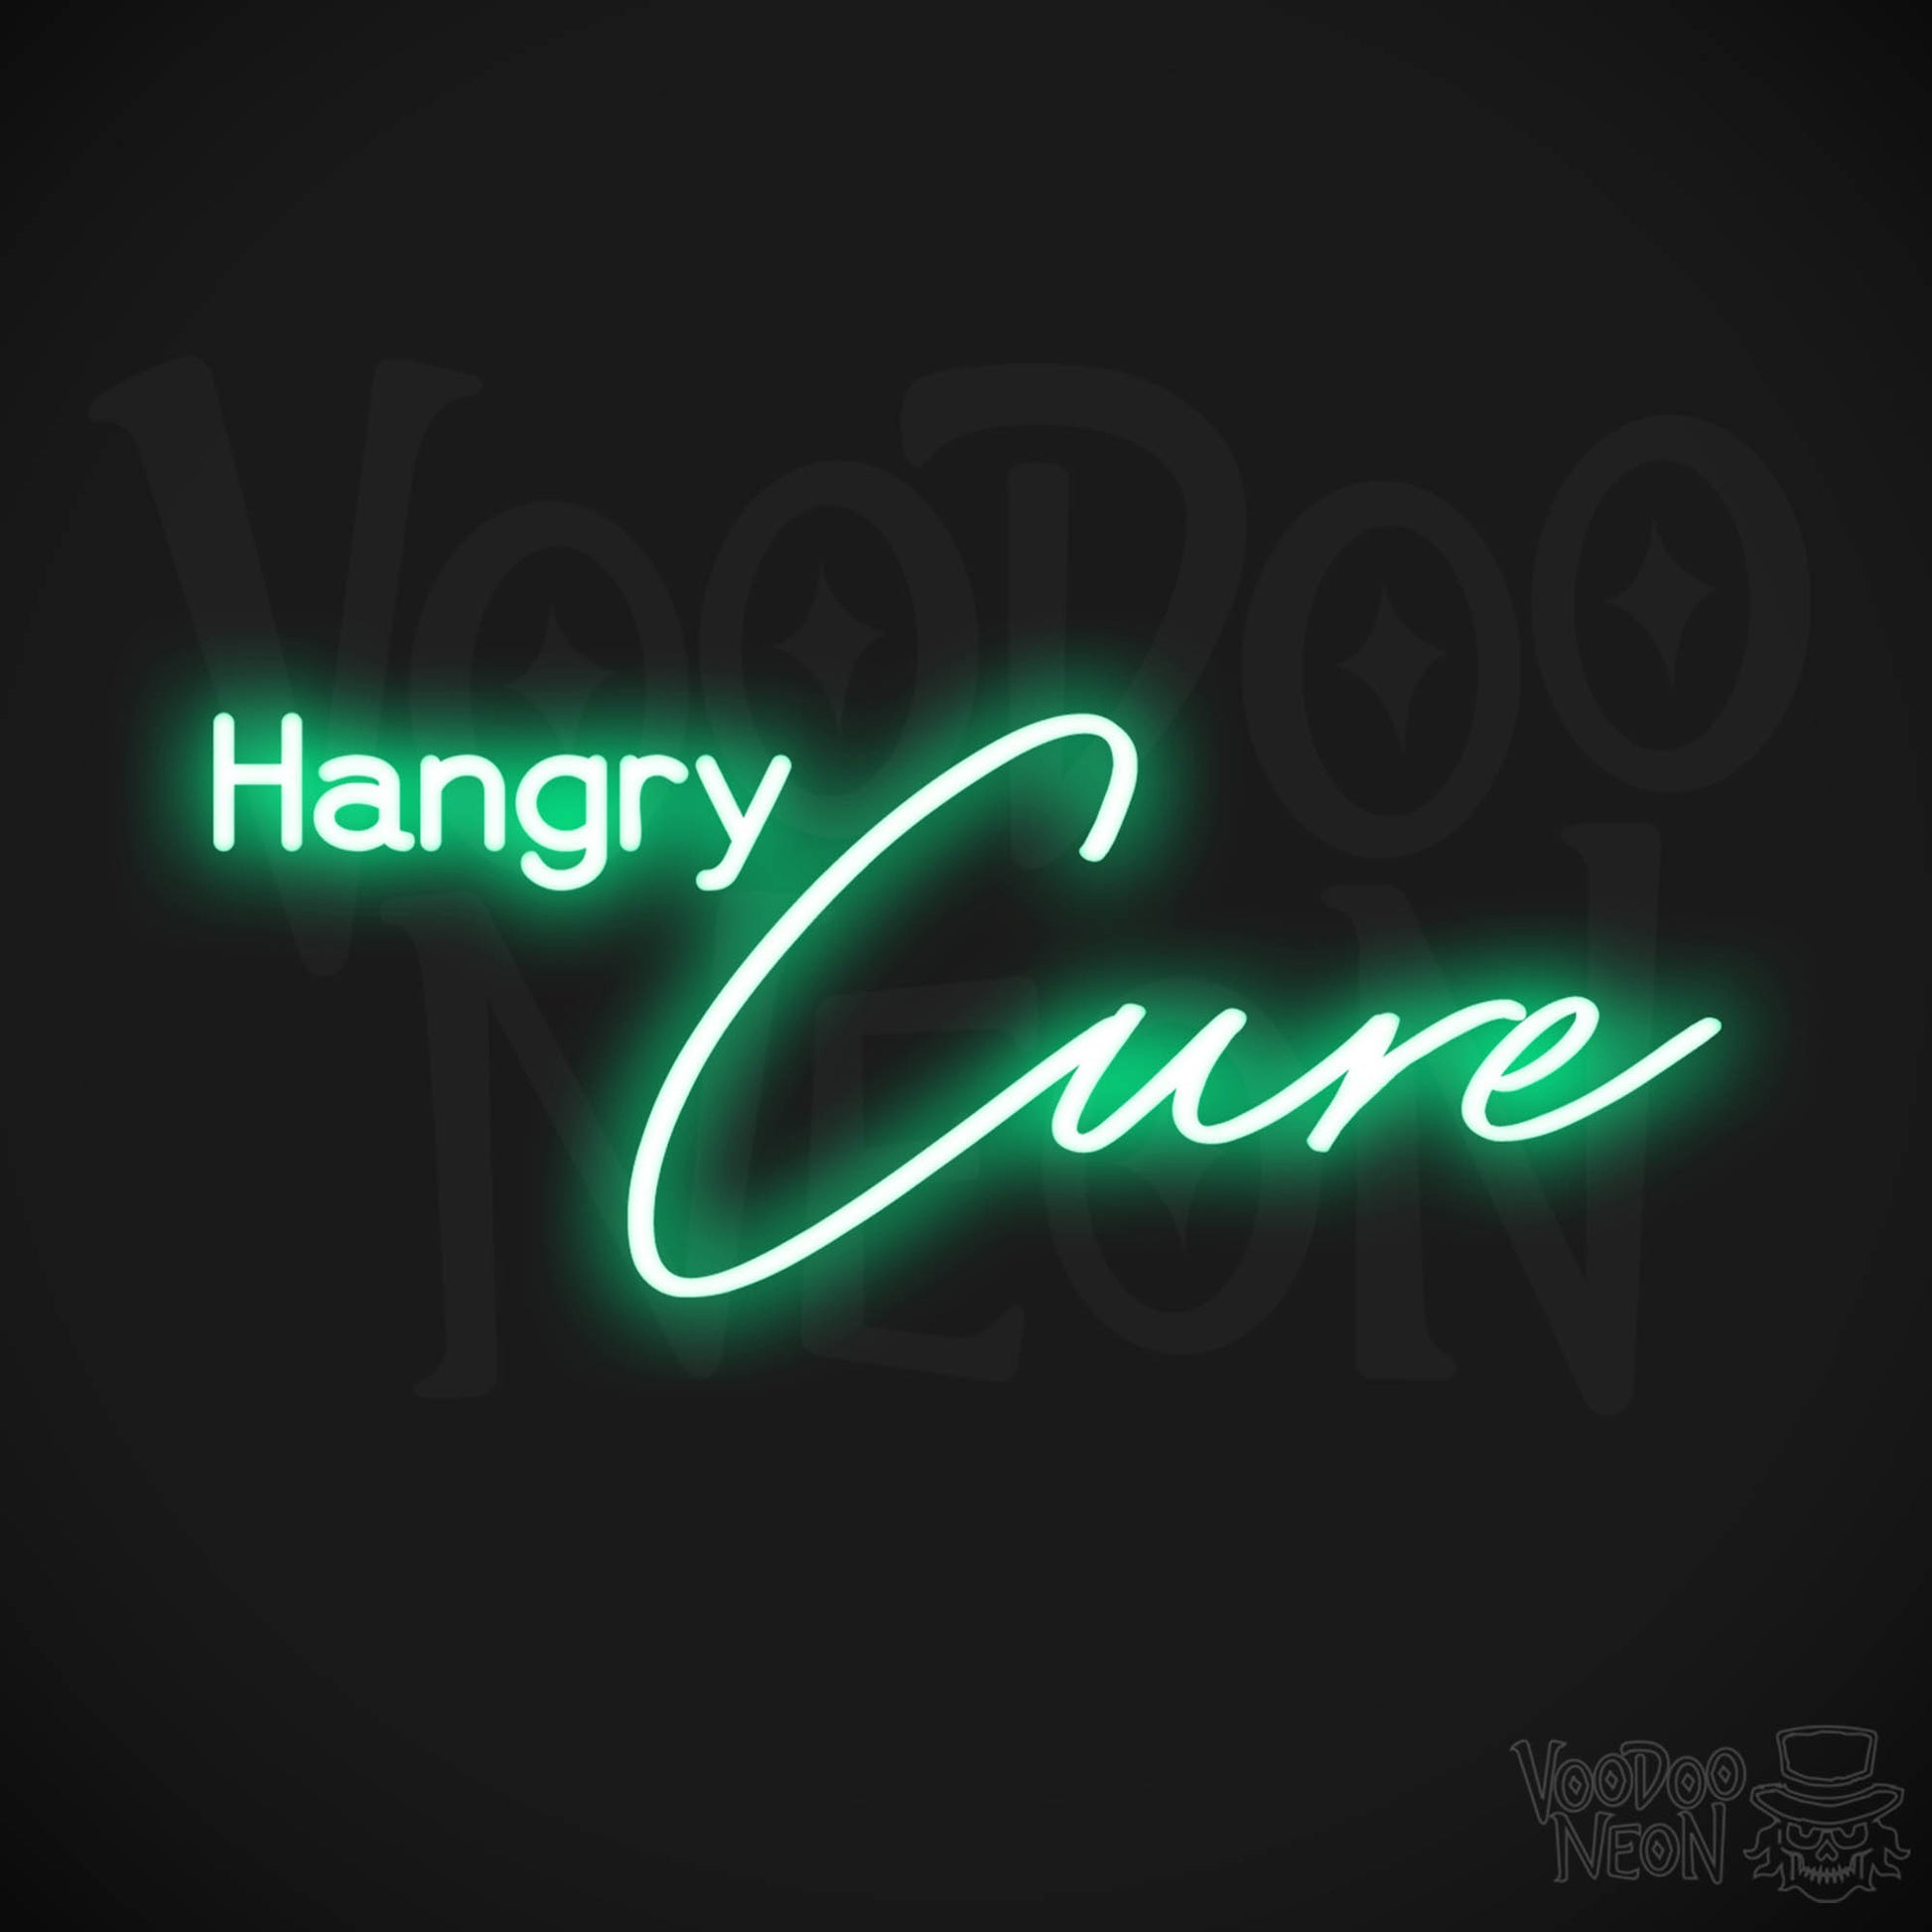 Hangry Cure LED Neon - Green